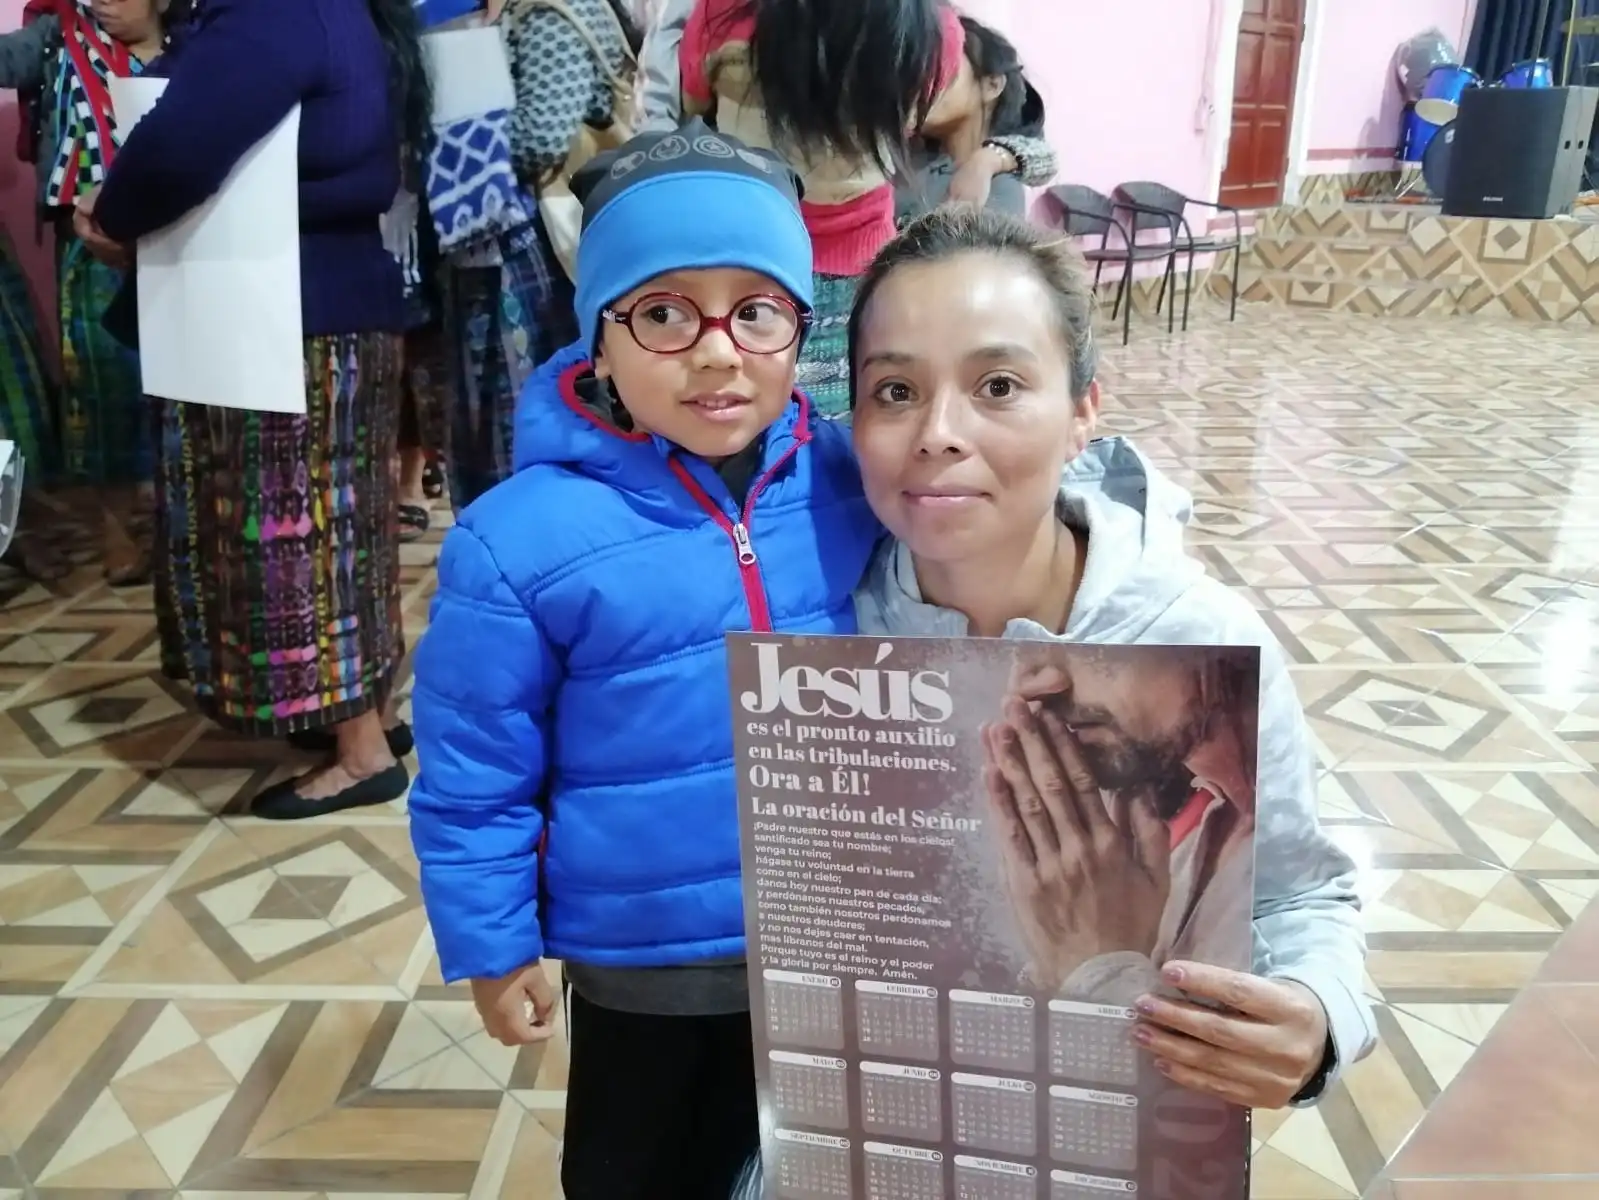 CITA accomplished: calendars in different languages ​​and a new eye clinic